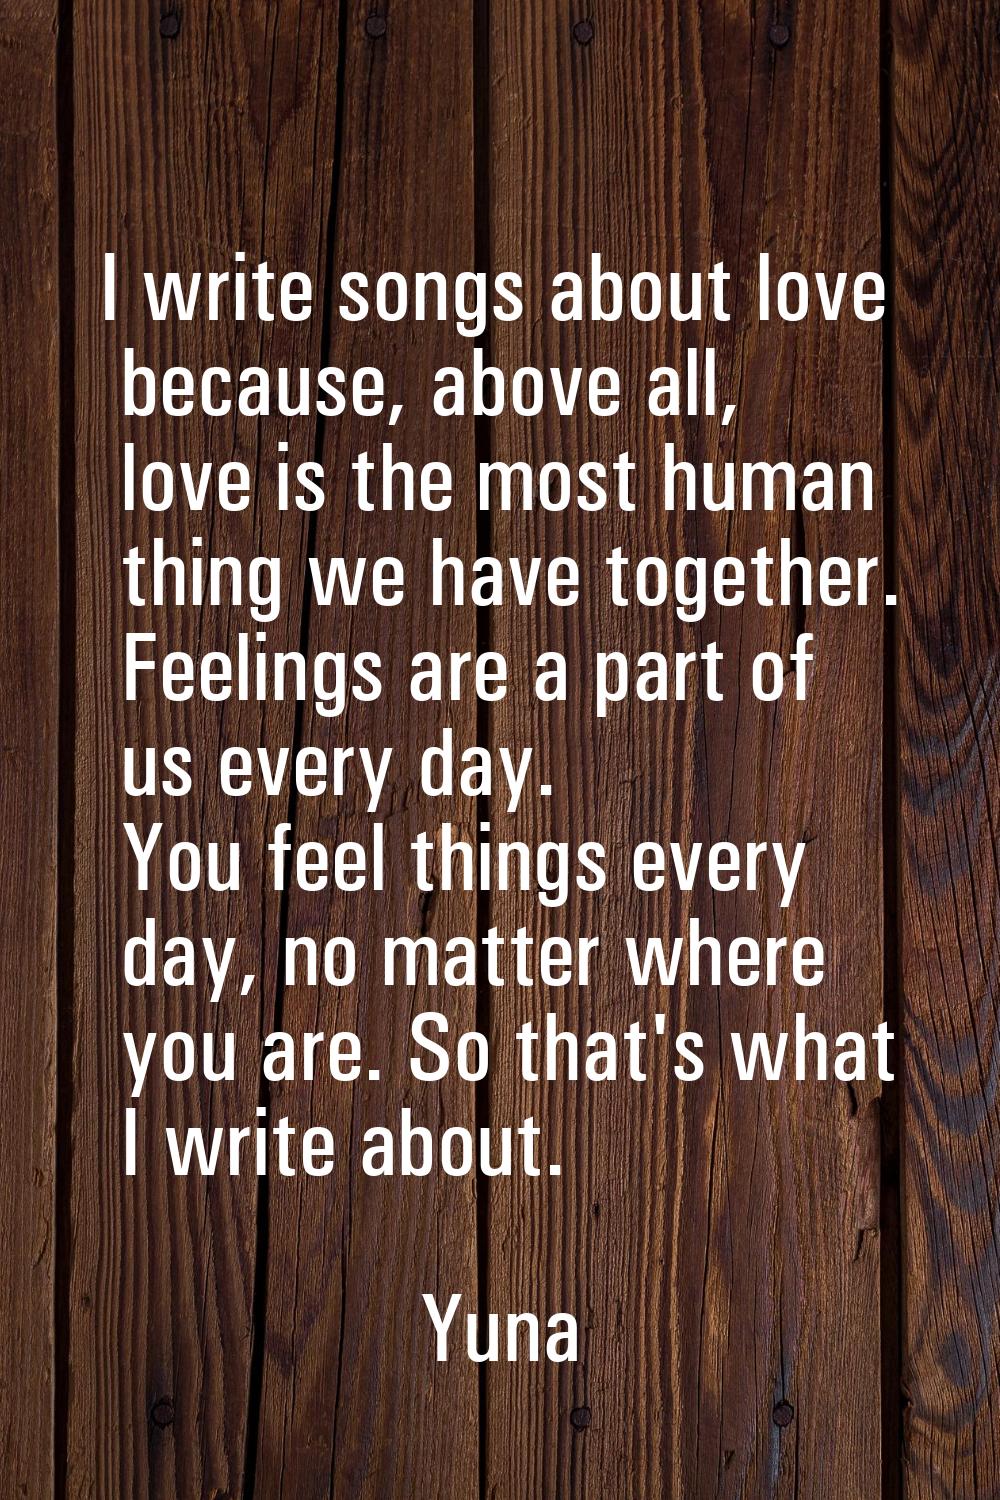 I write songs about love because, above all, love is the most human thing we have together. Feeling